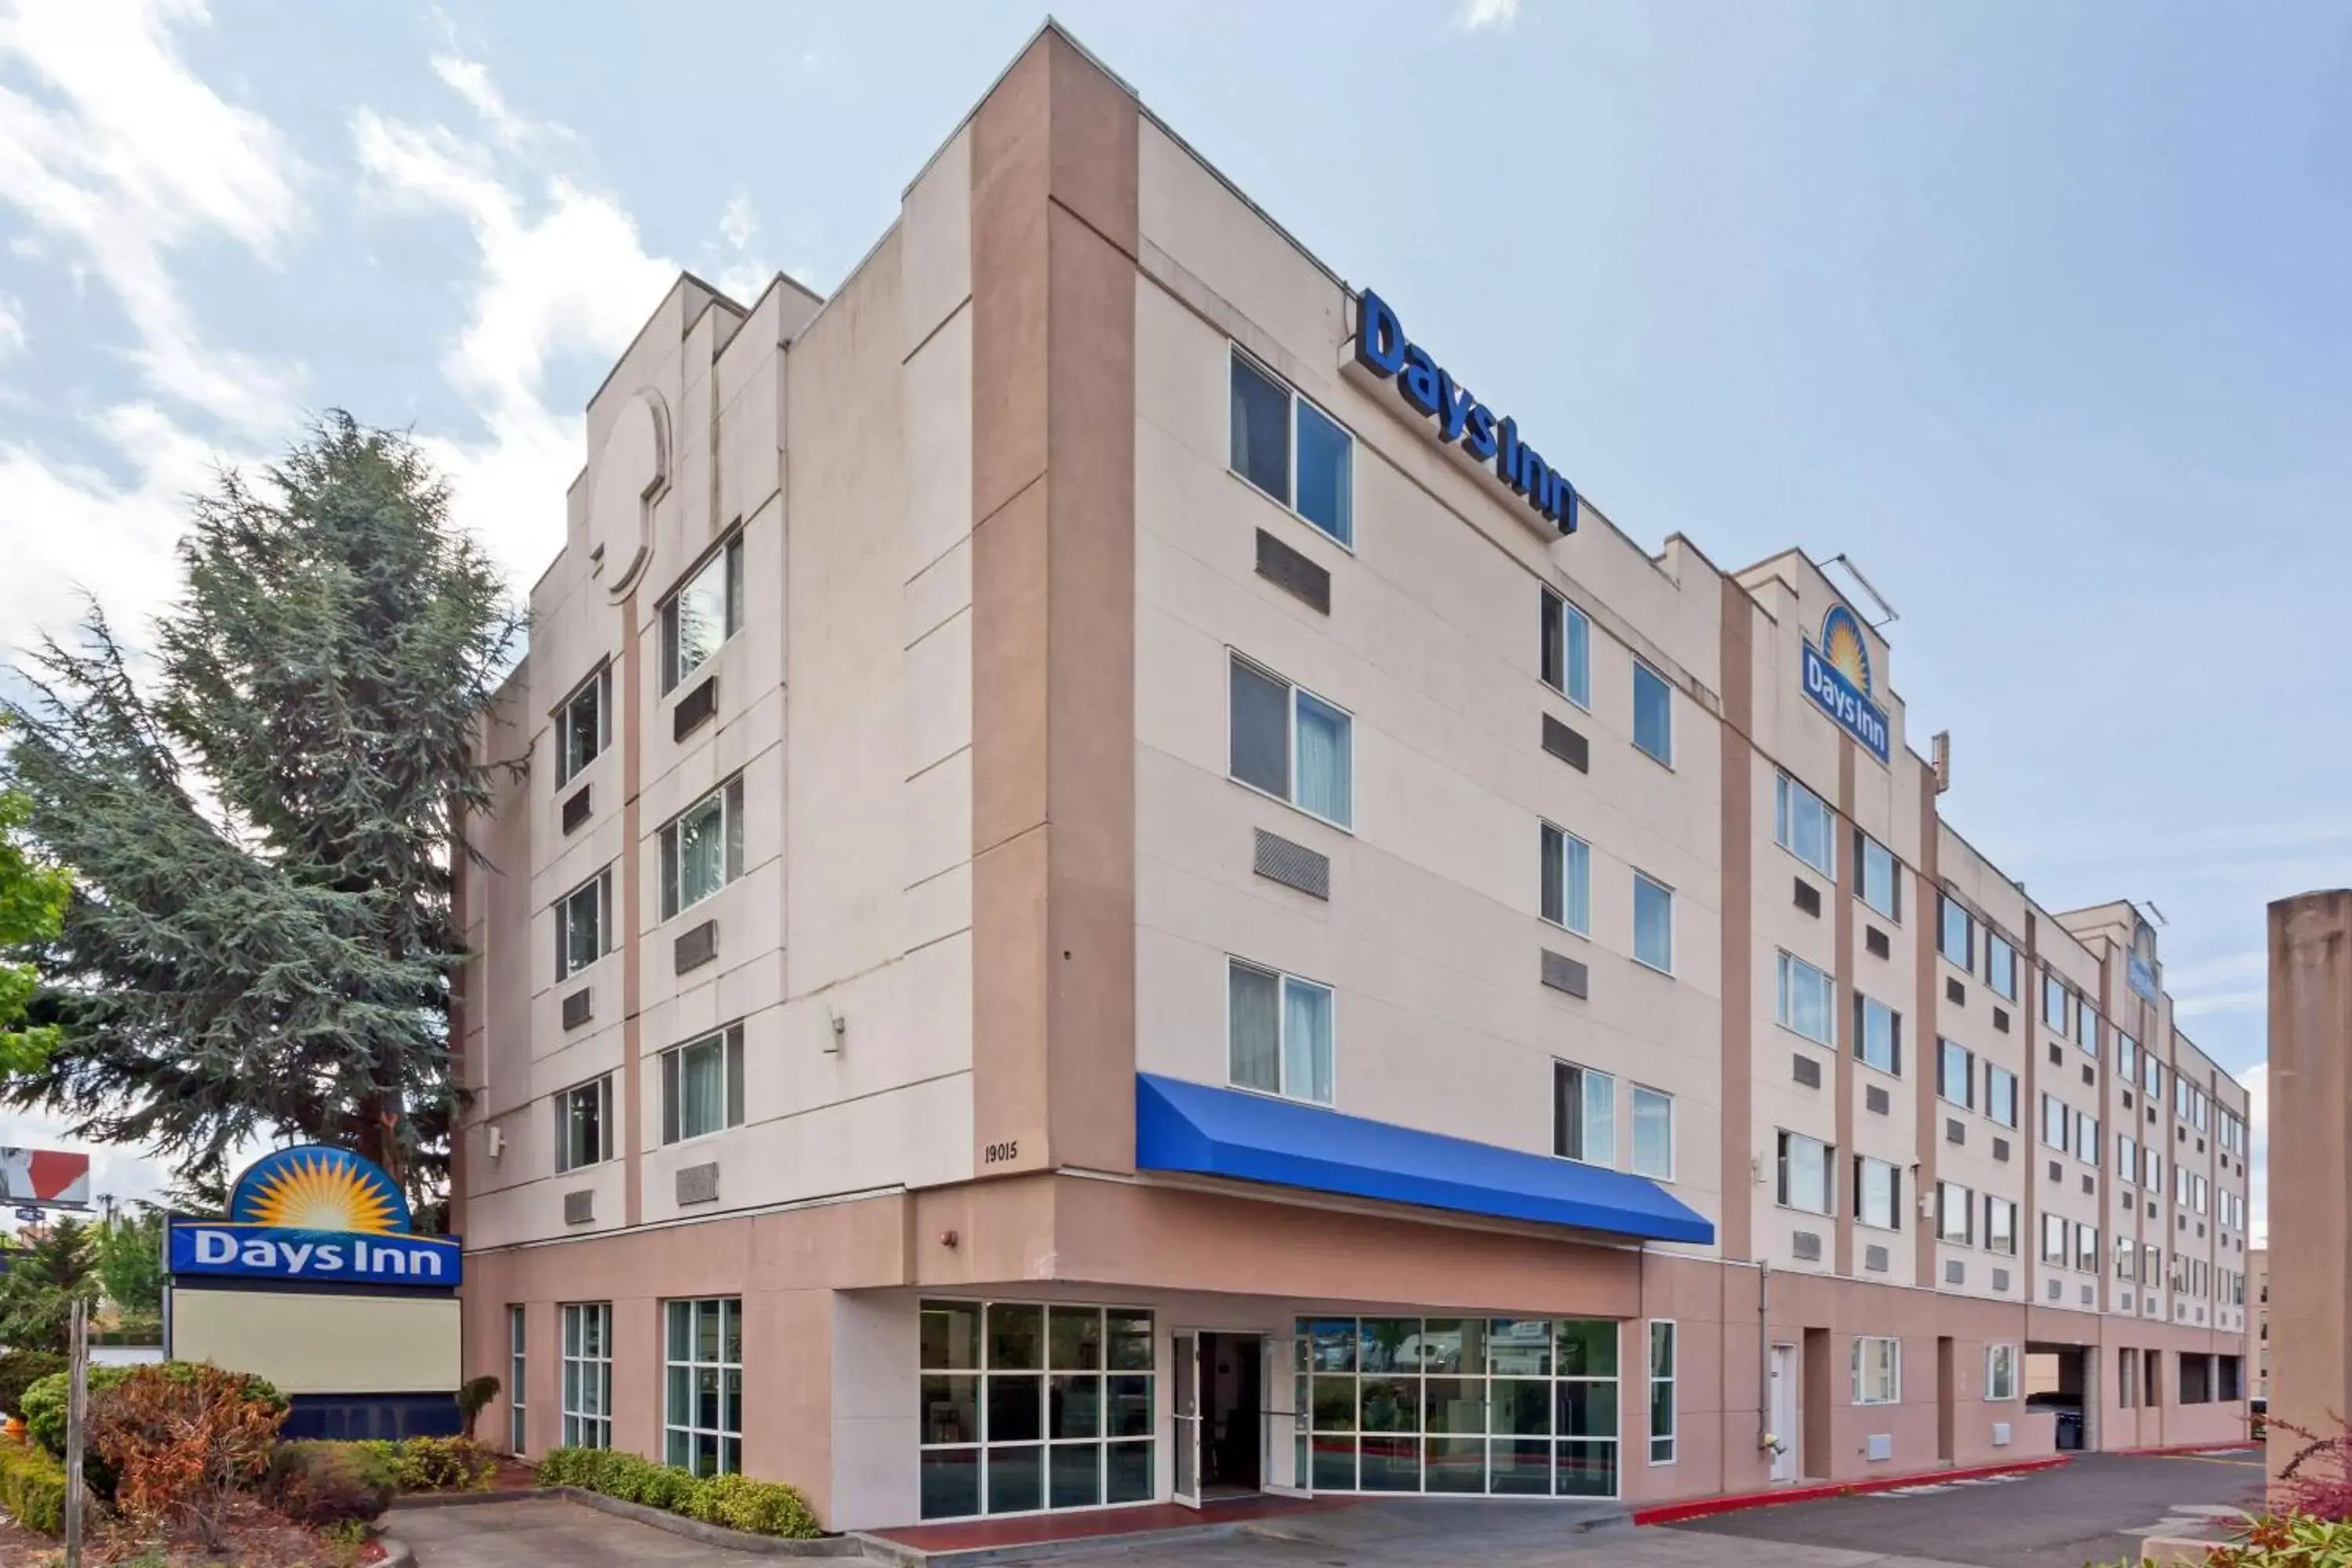 Property Building in Days Inn by Wyndham Seatac Airport